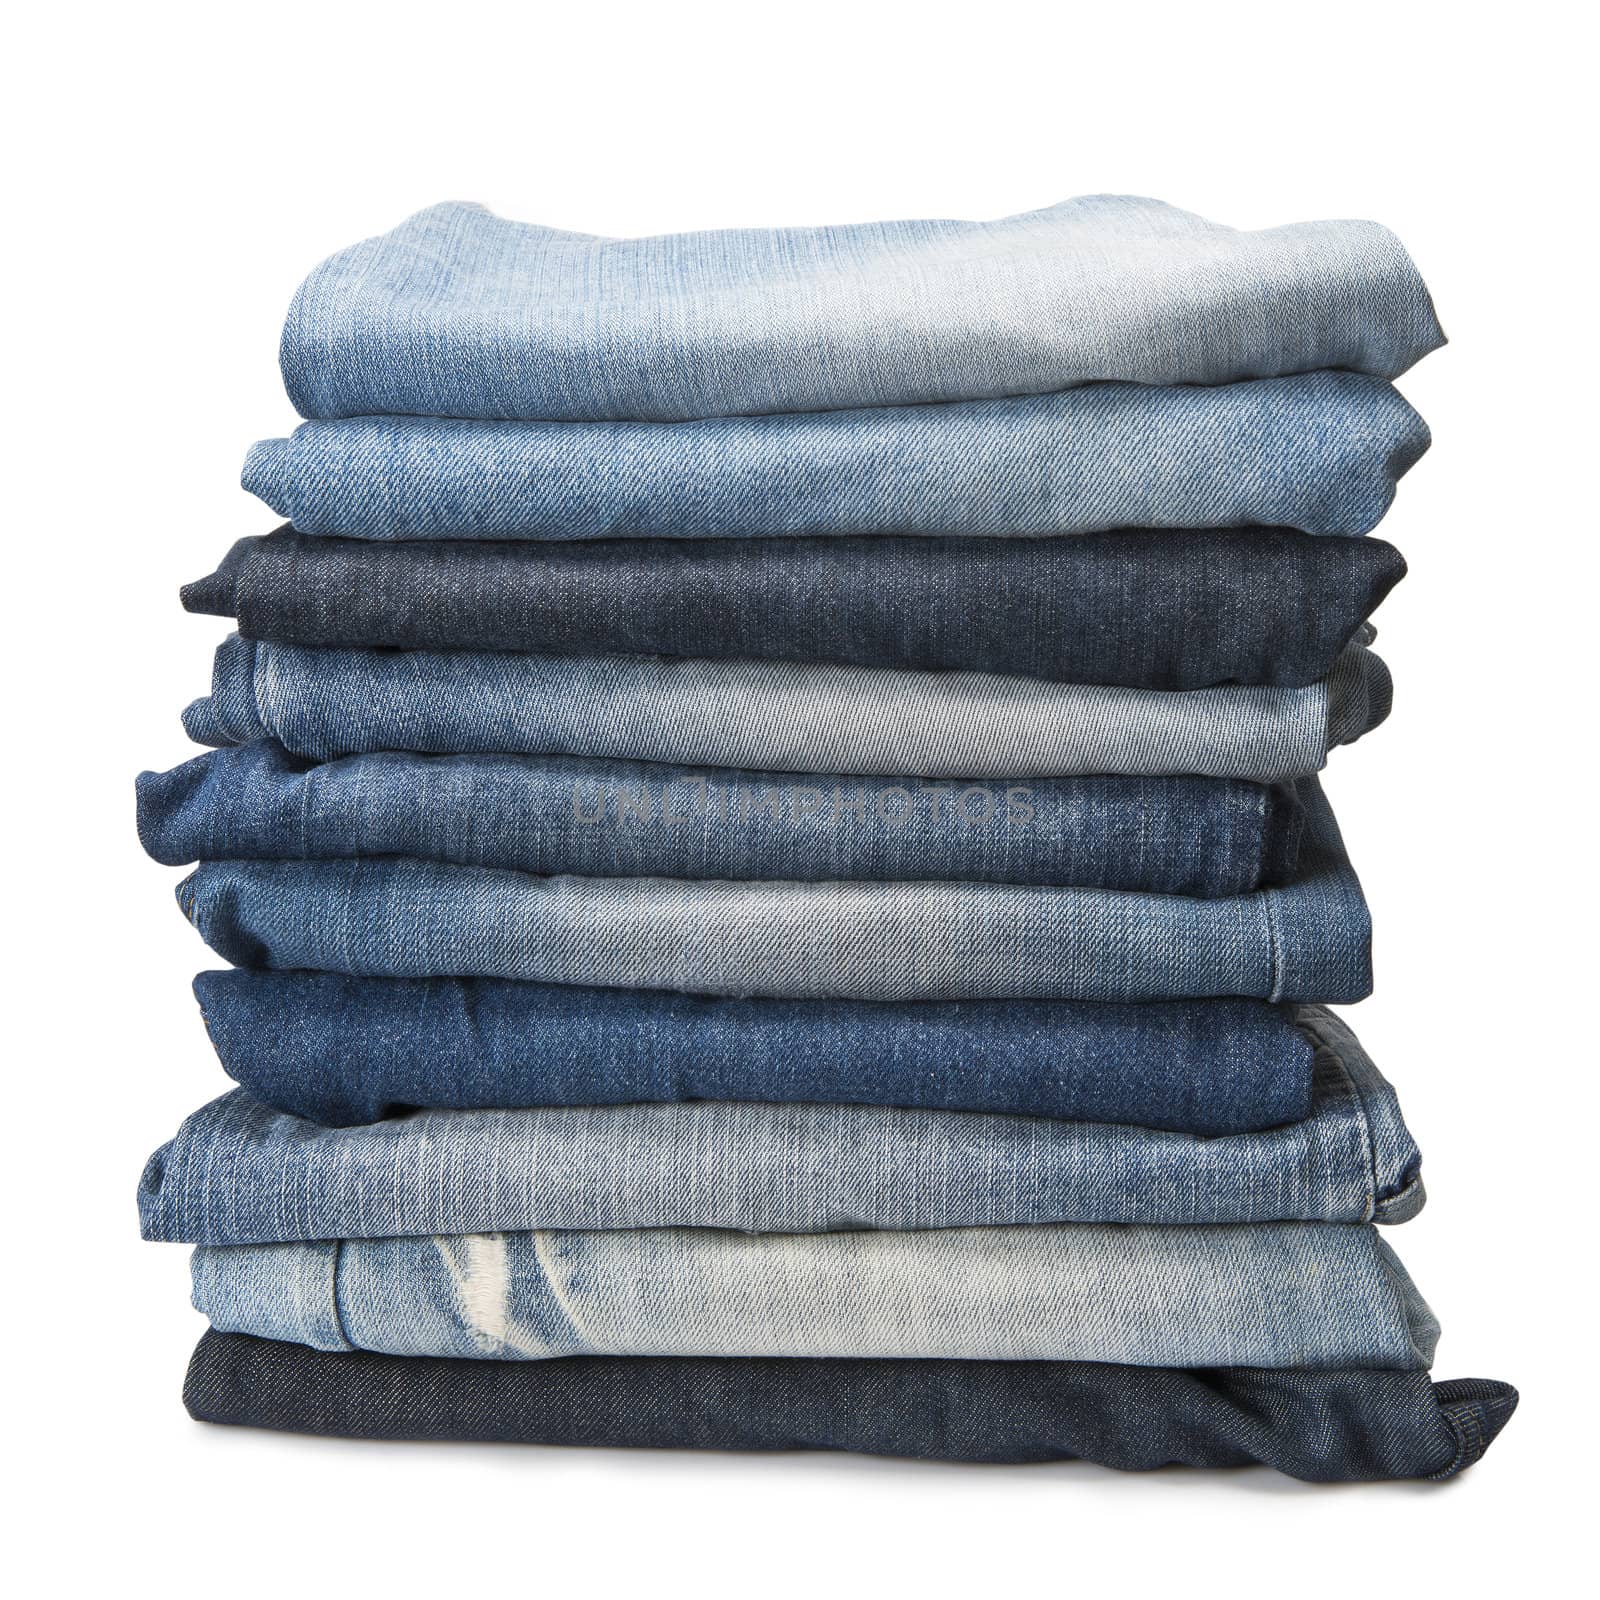 Stack of blue jeans over a white background by angelsimon